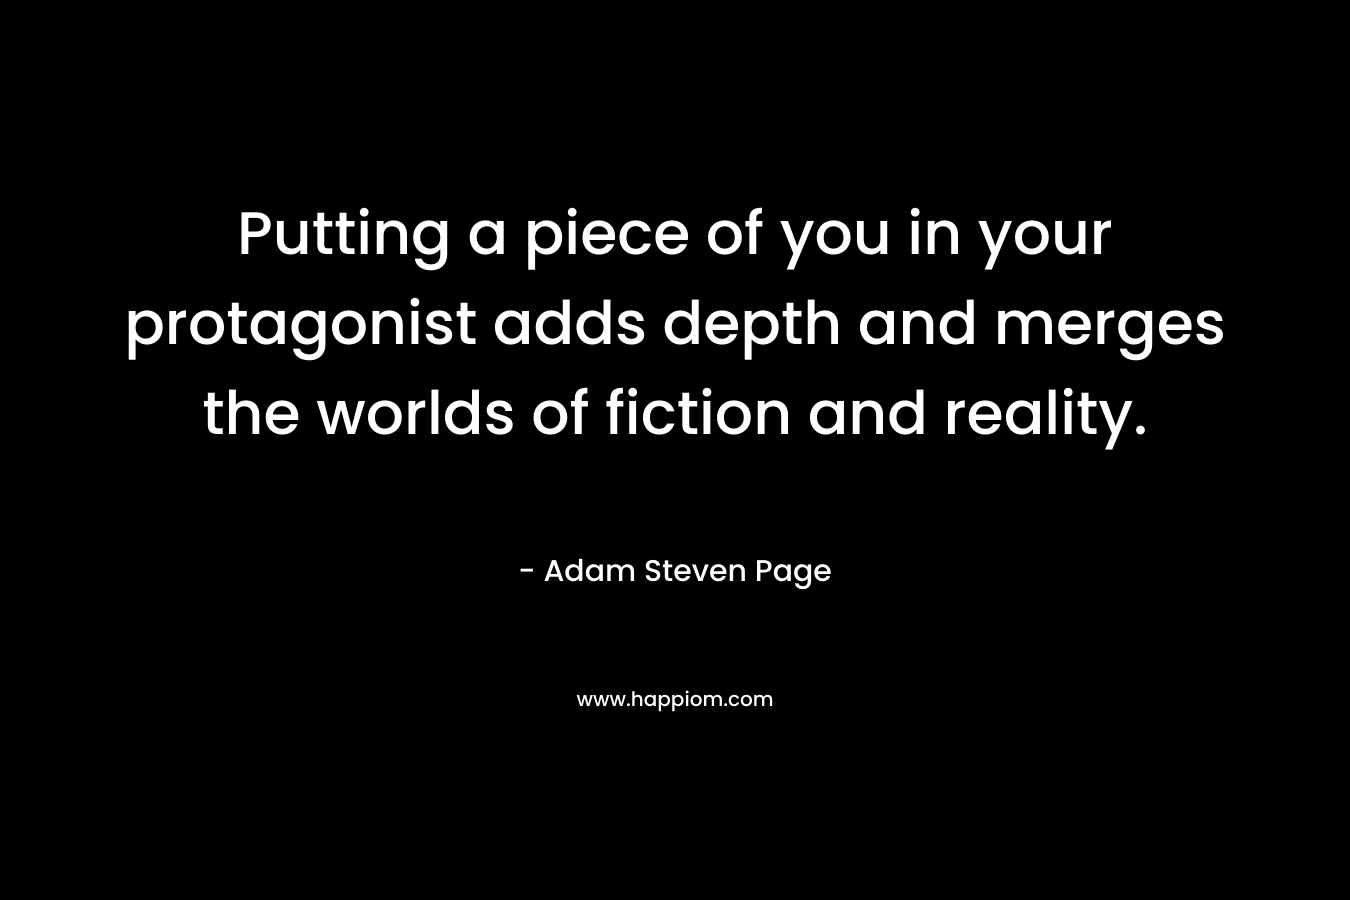 Putting a piece of you in your protagonist adds depth and merges the worlds of fiction and reality.